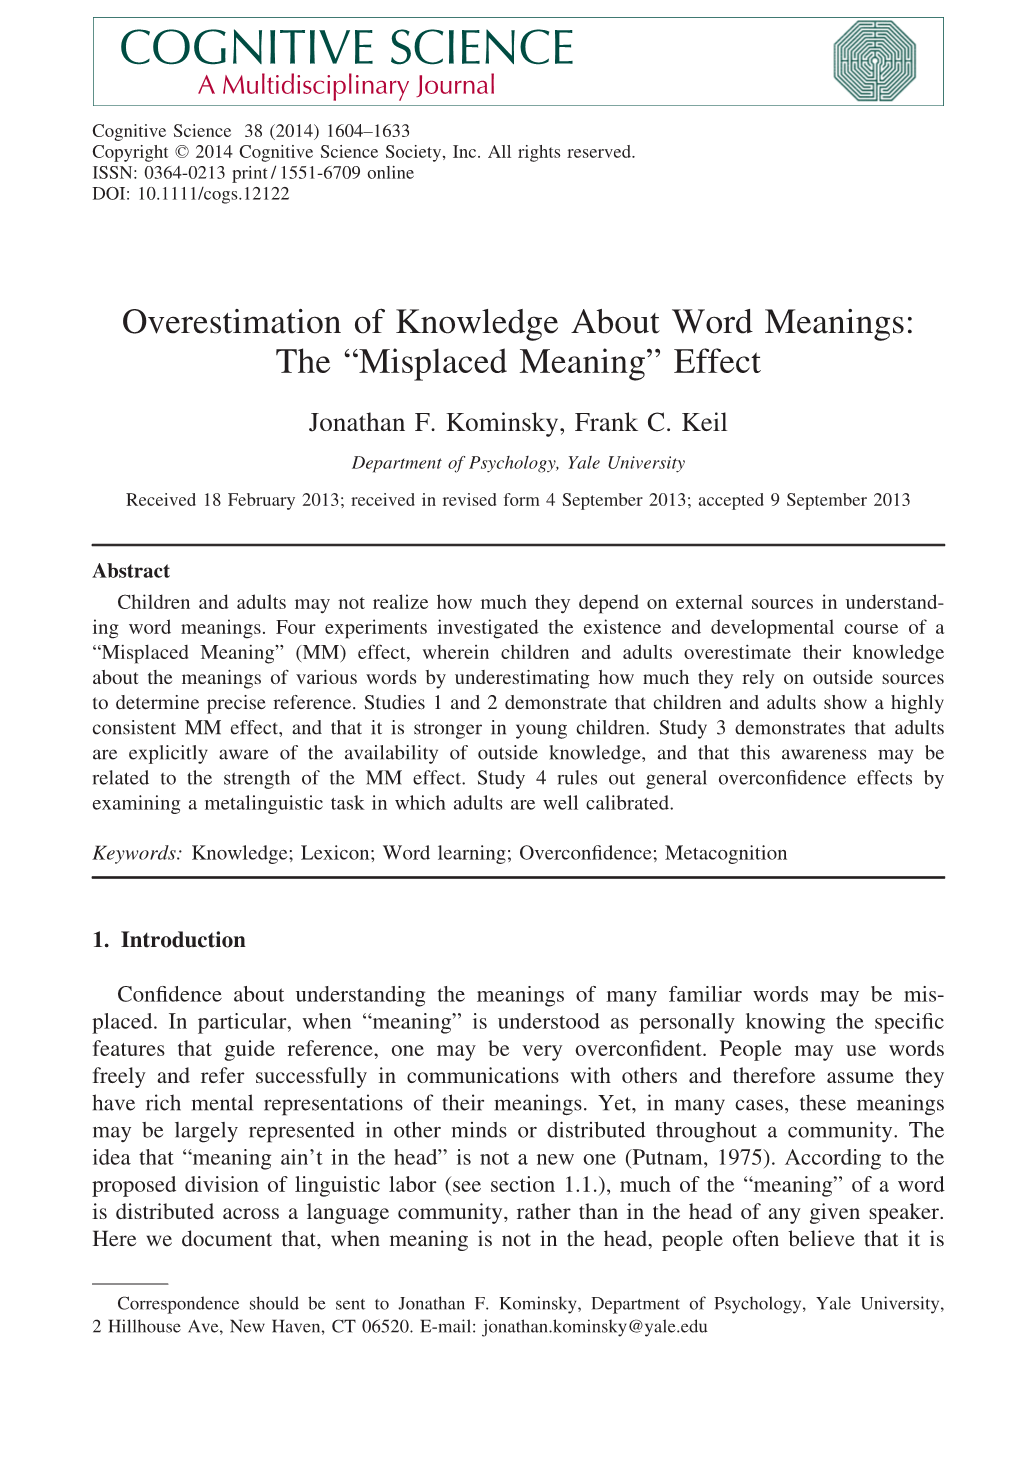 Overestimation of Knowledge About Word Meanings: the “Misplaced Meaning” Effect